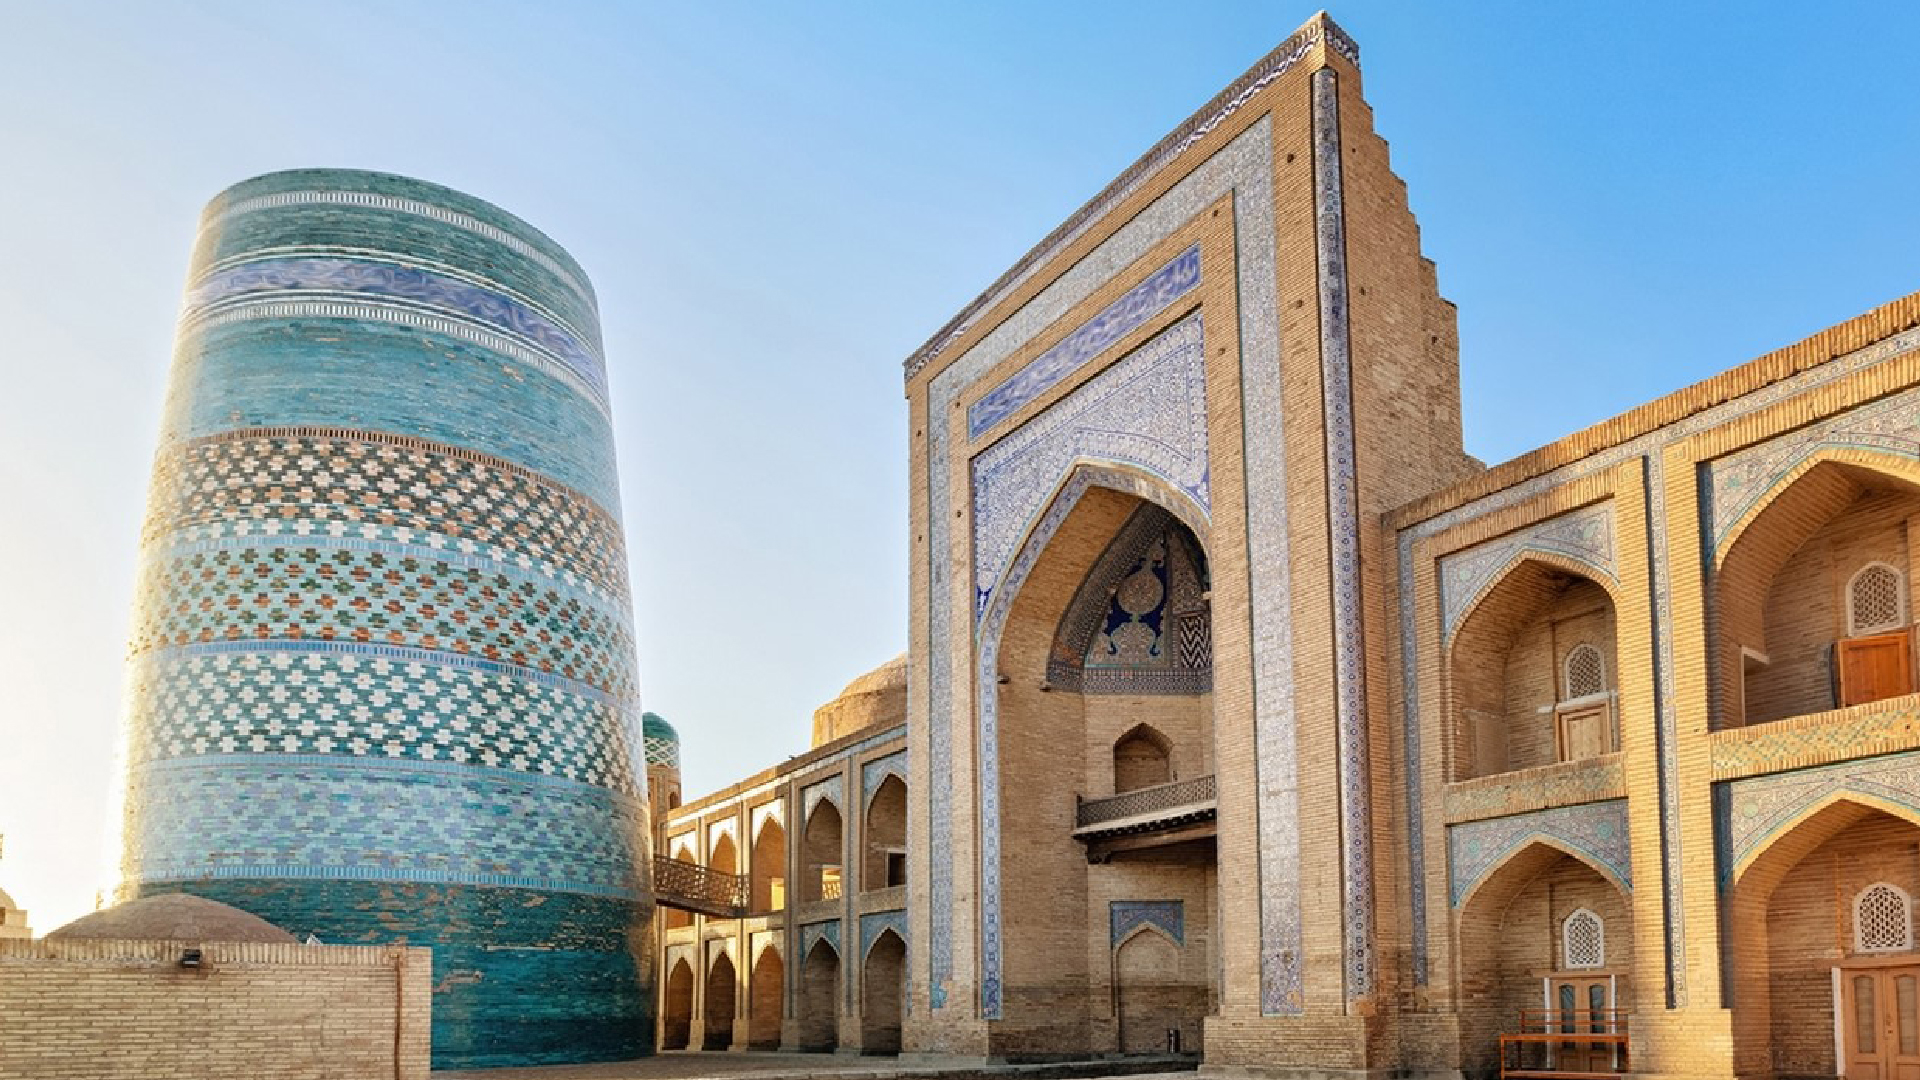 The Golden Road to Samarkand – The Architecture, Art and Textiles of Uzbekistan